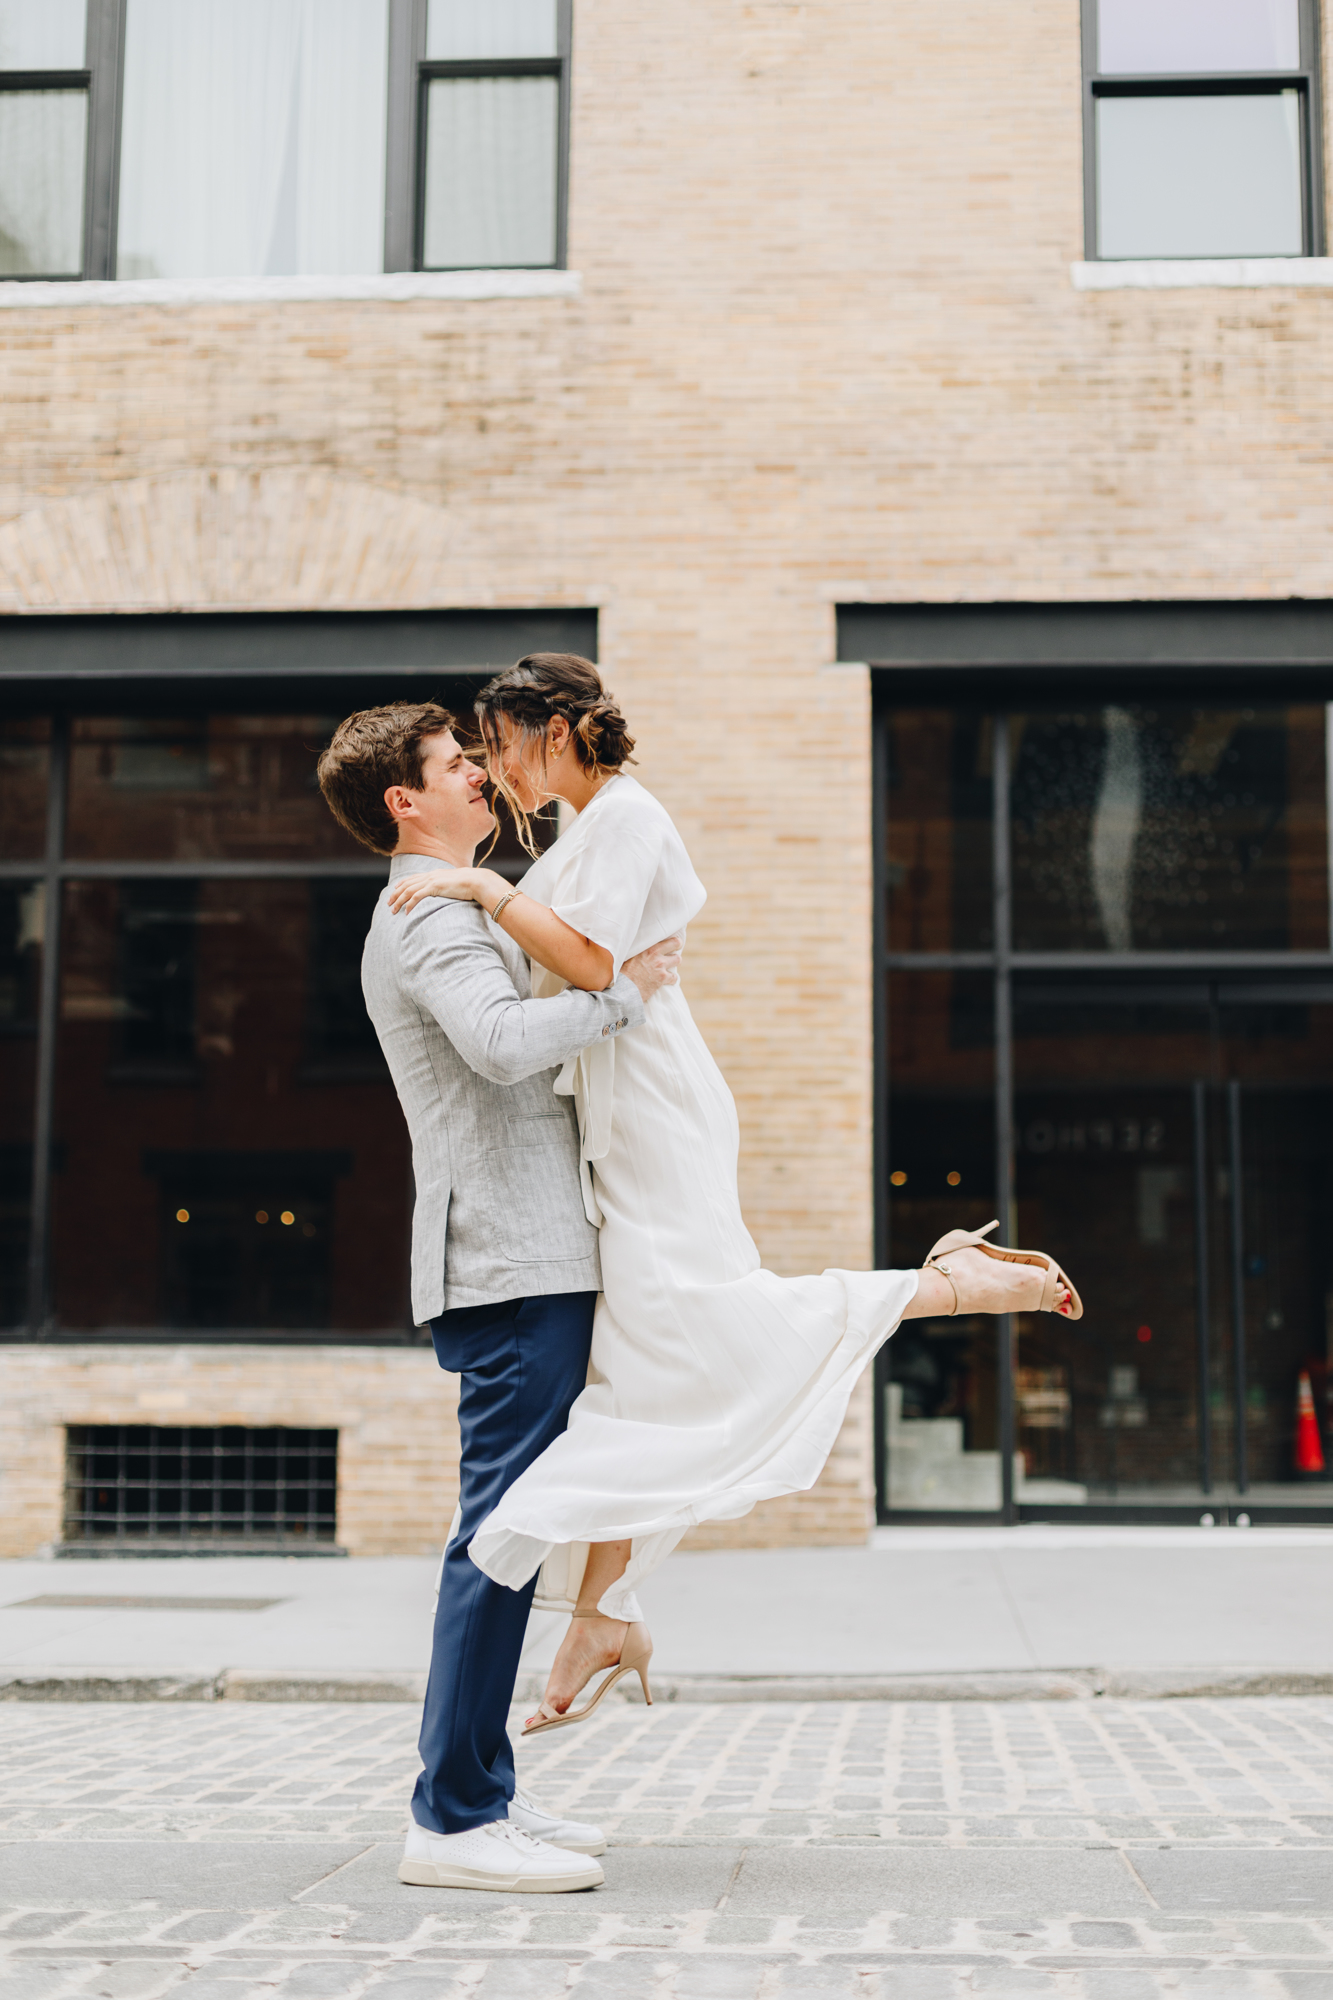 Meatpacking District wedding photos